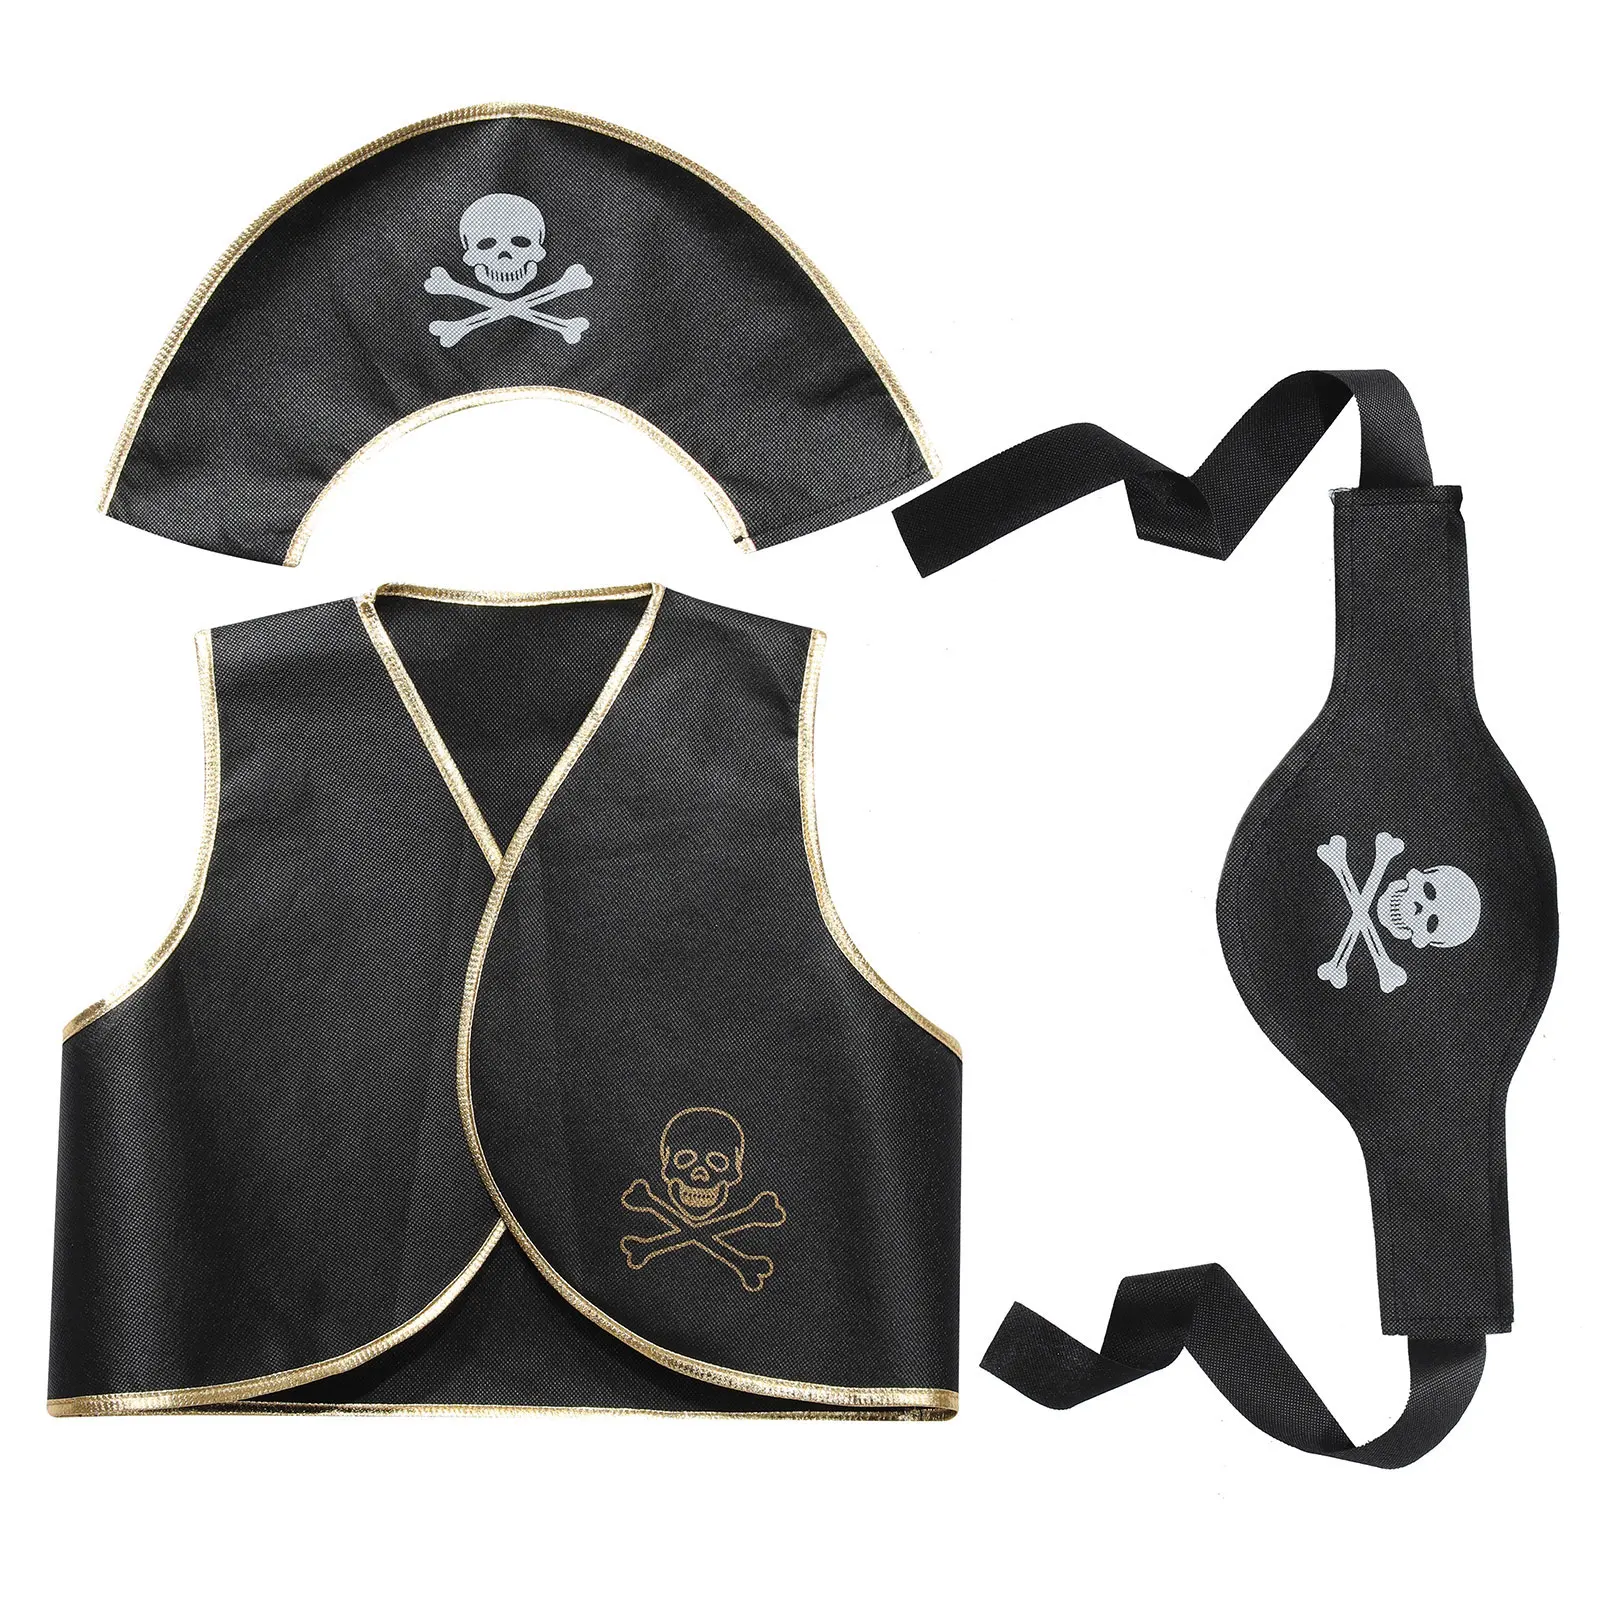 holiday pirate captain hat belt cosplay costume for children boys fantasia infantil of the caribbean dress cosplay clothing Kids Halloween Pirate Jack Captain Cosplay Costume Skull Print Eyeshade+Vest+Hat Belt+Earring Set Theme Party Dress Up Props